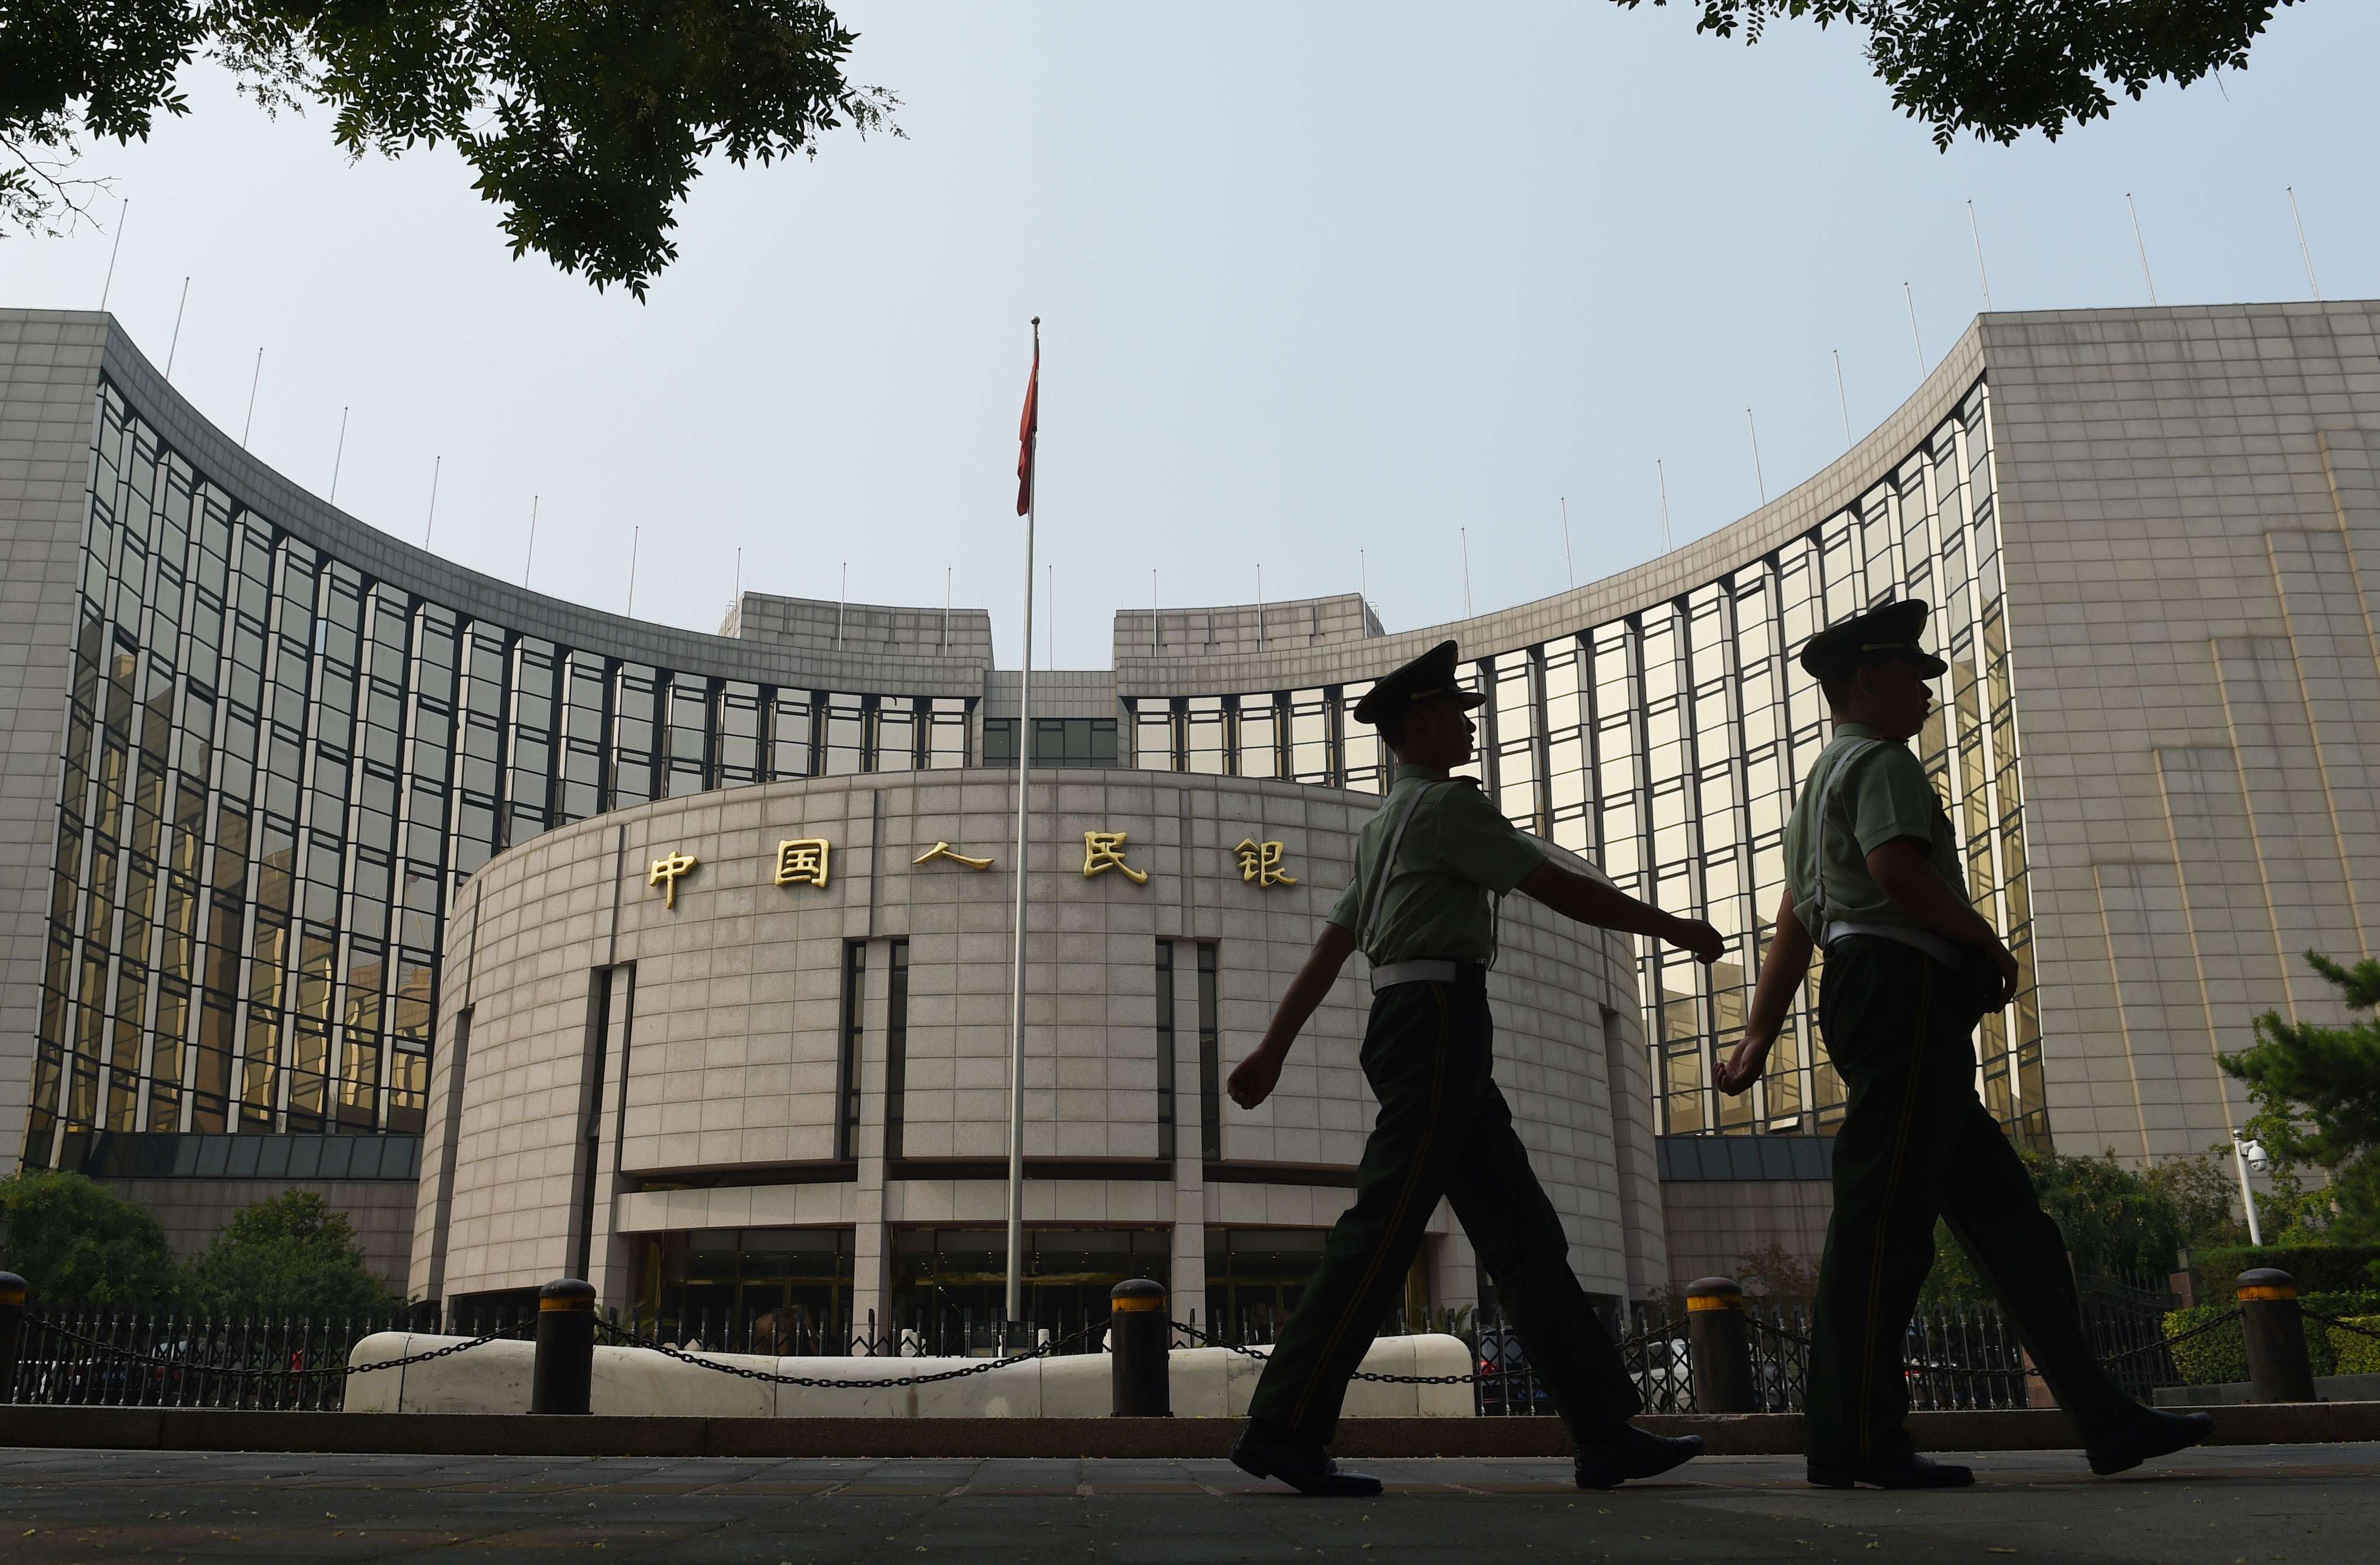 The PBOC suffered the world’s biggest loss, while China Investment Corporation enjoyed the biggest gain